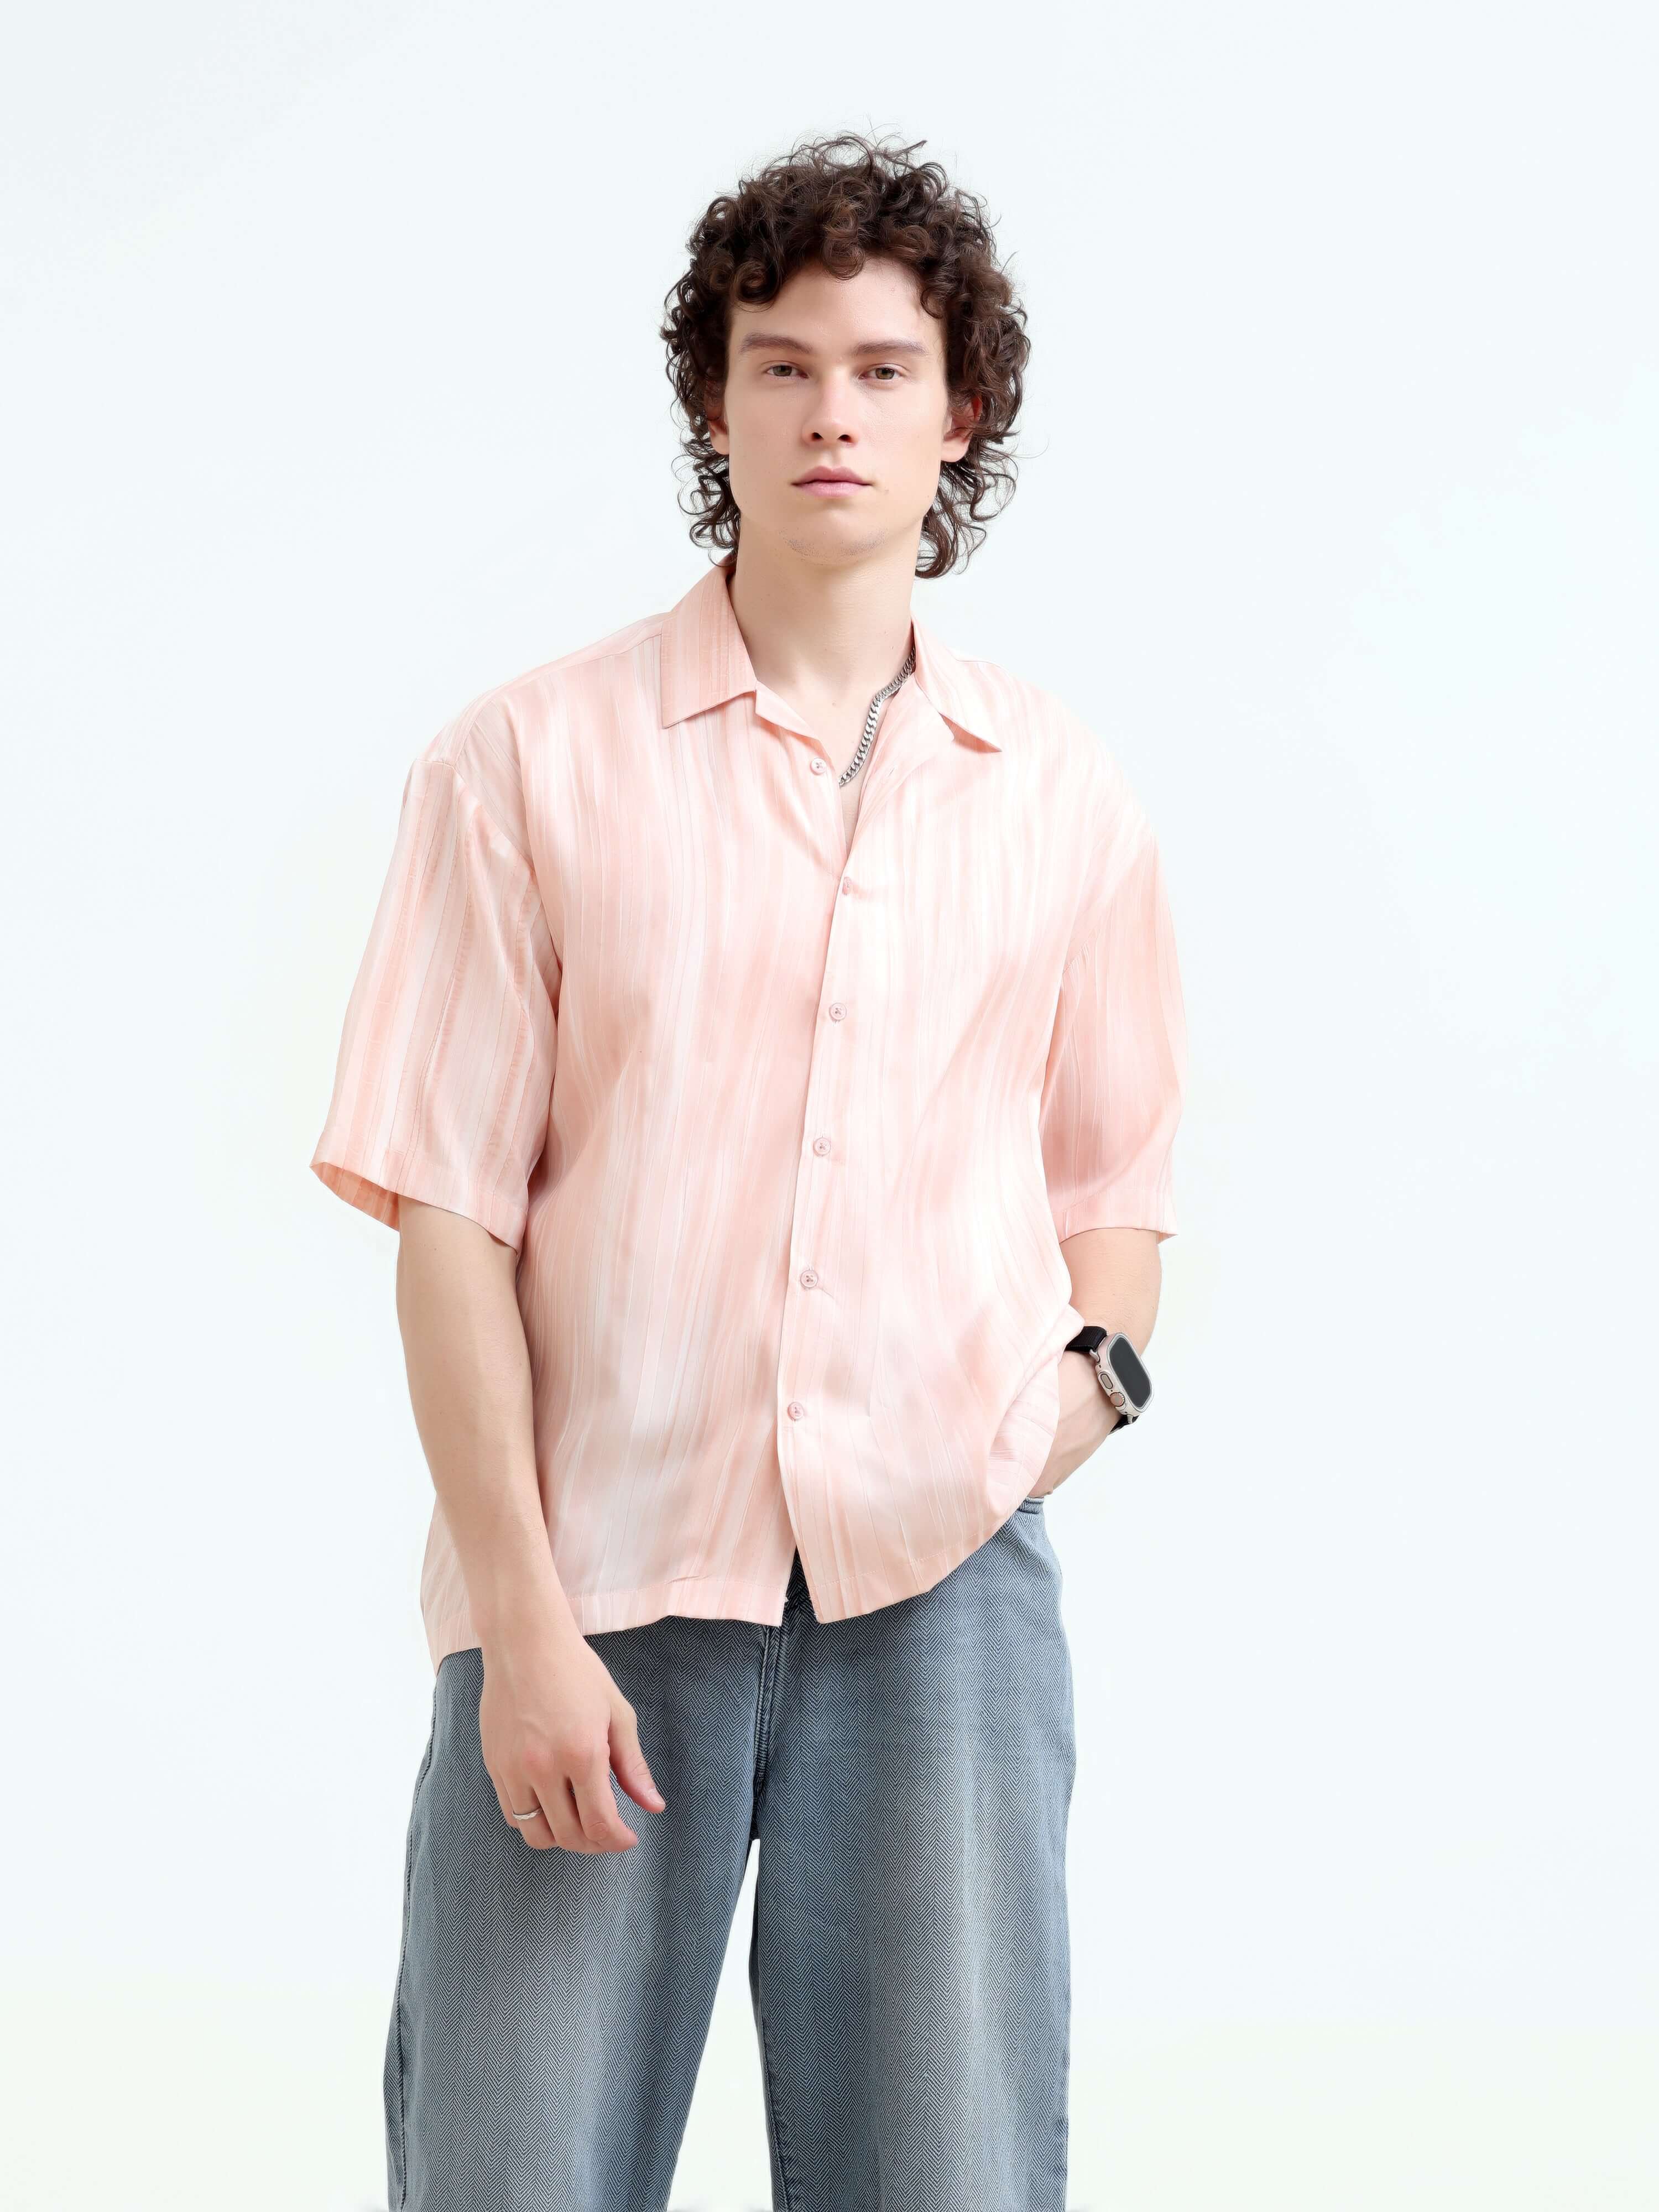 Pastel Pink Oversized Shirt for Men - Shop New Arrival shop online at Estilocus. Embrace summer with our pastel pink oversized shirt for men. Perfect for a casual yet stylish look. Lightweight, comfy & in the latest style!